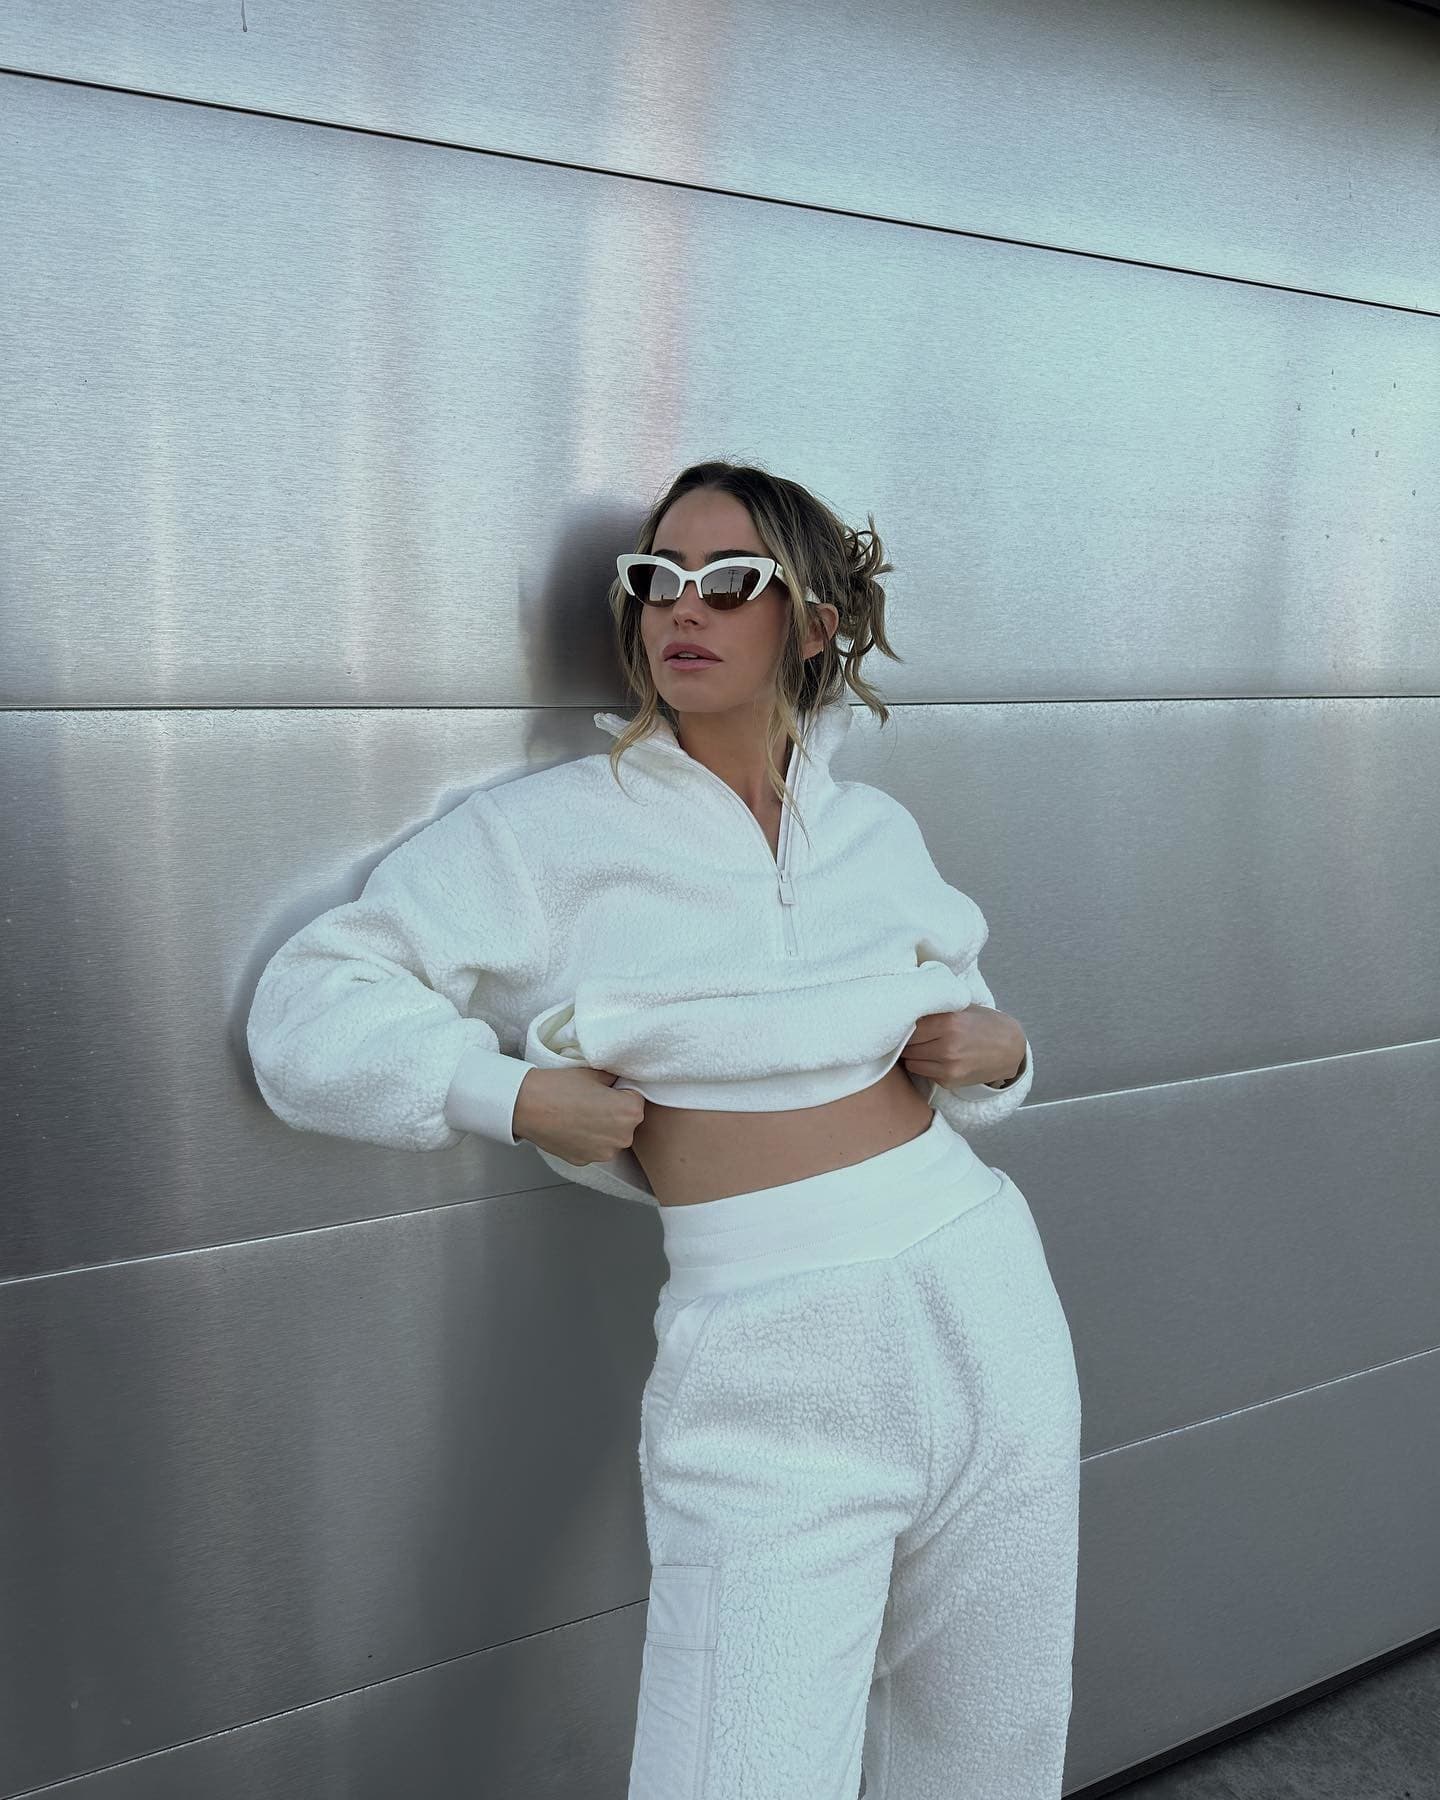 @ewebzz wearing a micro sherpa quarter zip jacket with a matching pair of micro sherpa sweatpants with cat-eye sunglasses standing against a silver metal wall.  